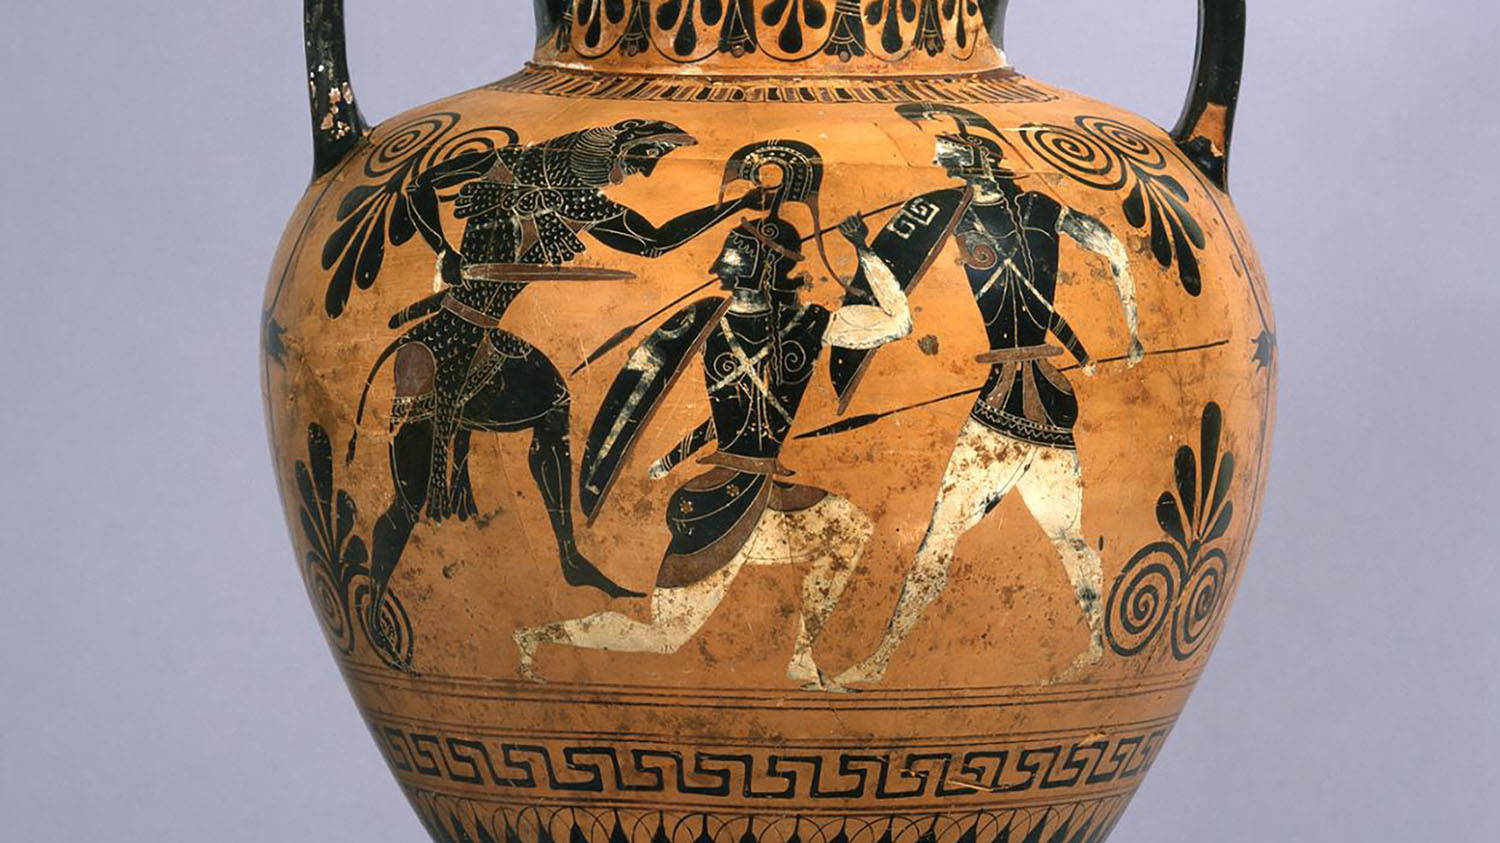 Amphora depicting Heracles fighting two Amazons.